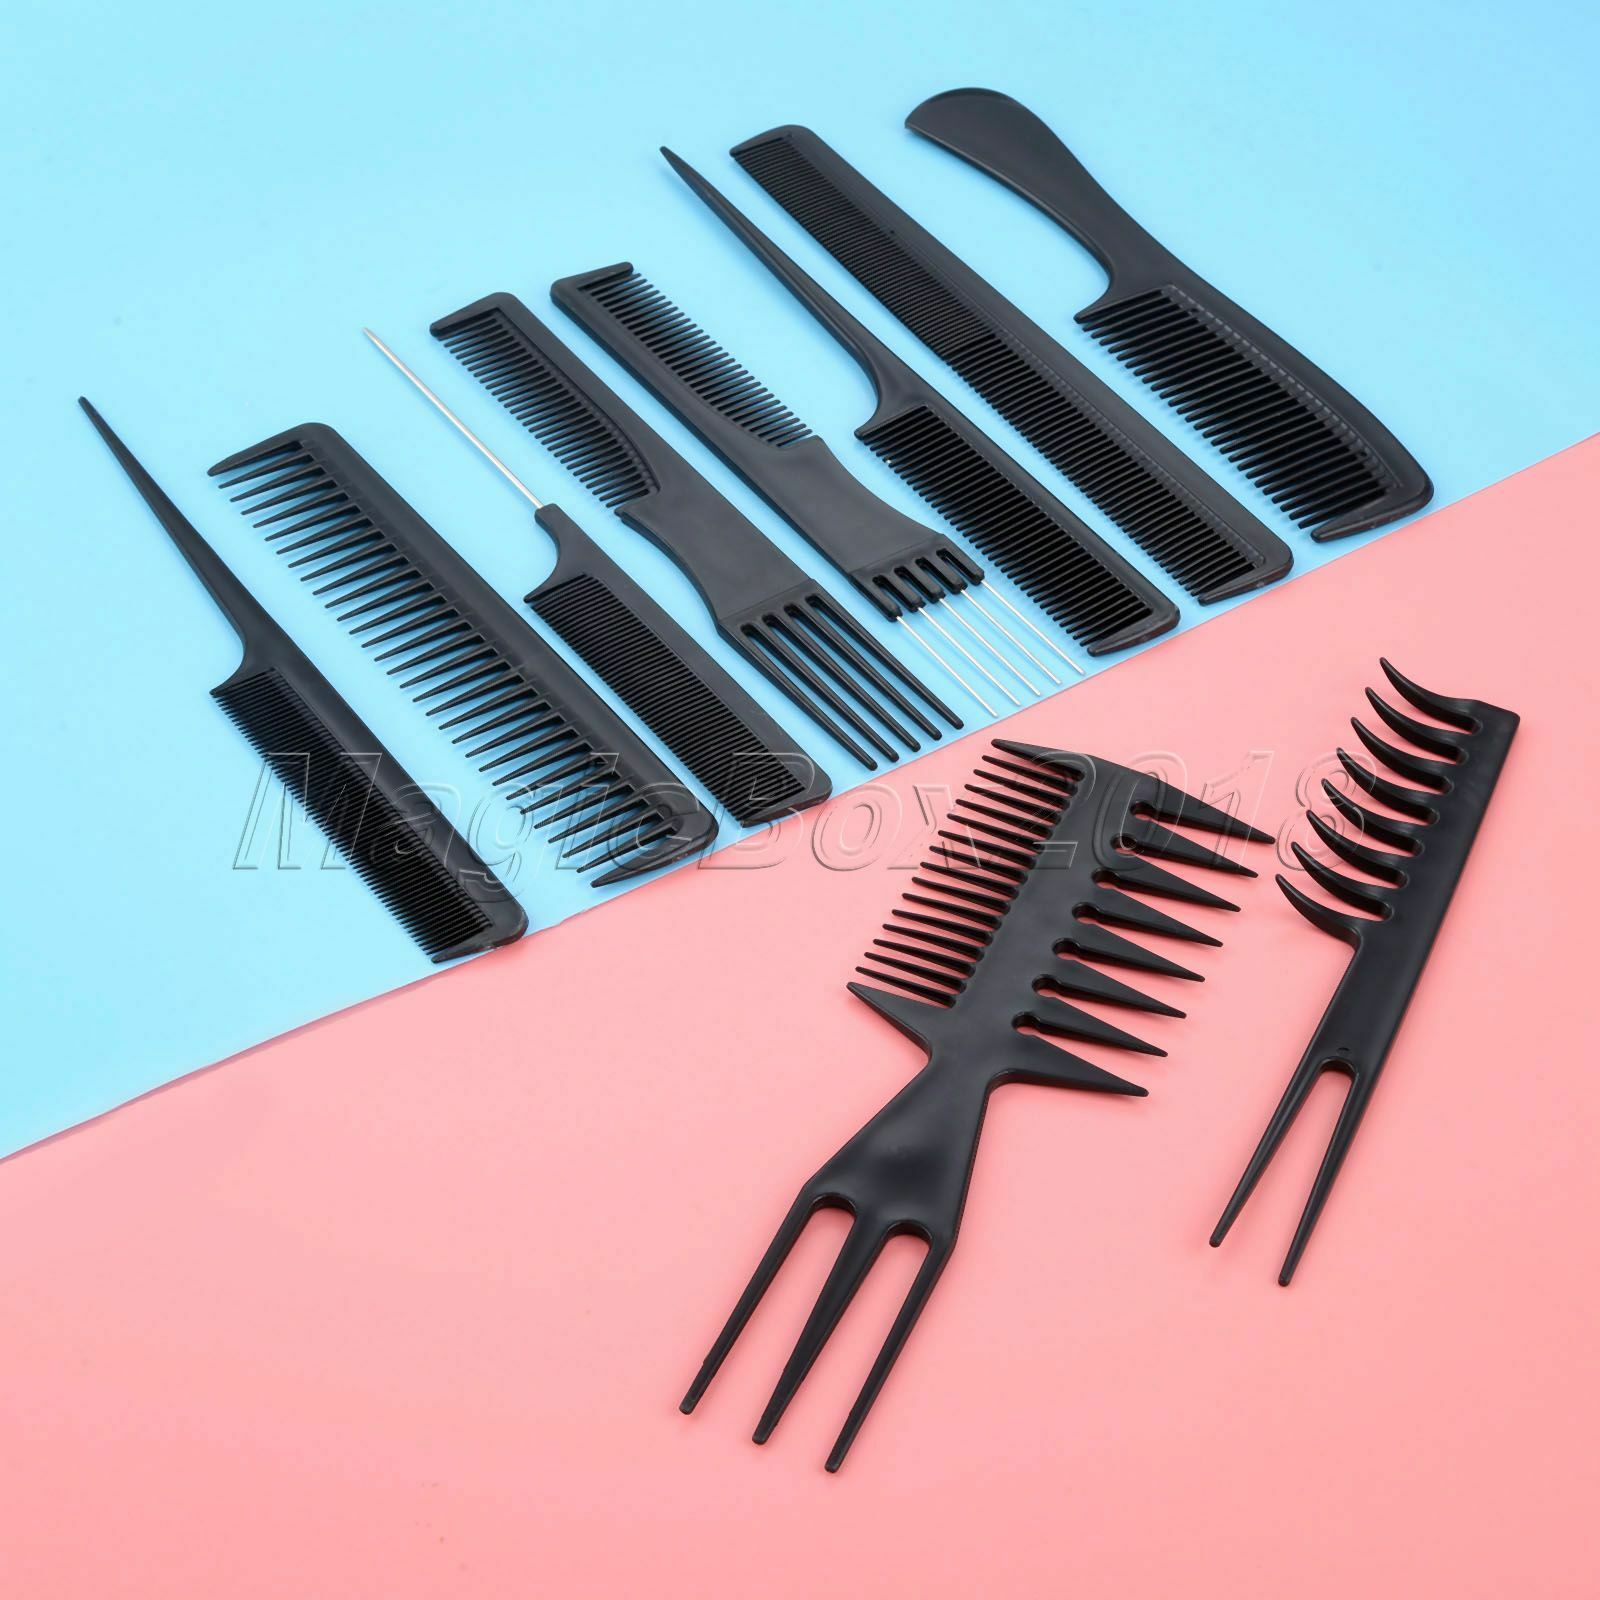 10Pcs/Set Hairdressing Comb Brush for Salon Barber Hair Styling Dyeing Cutting